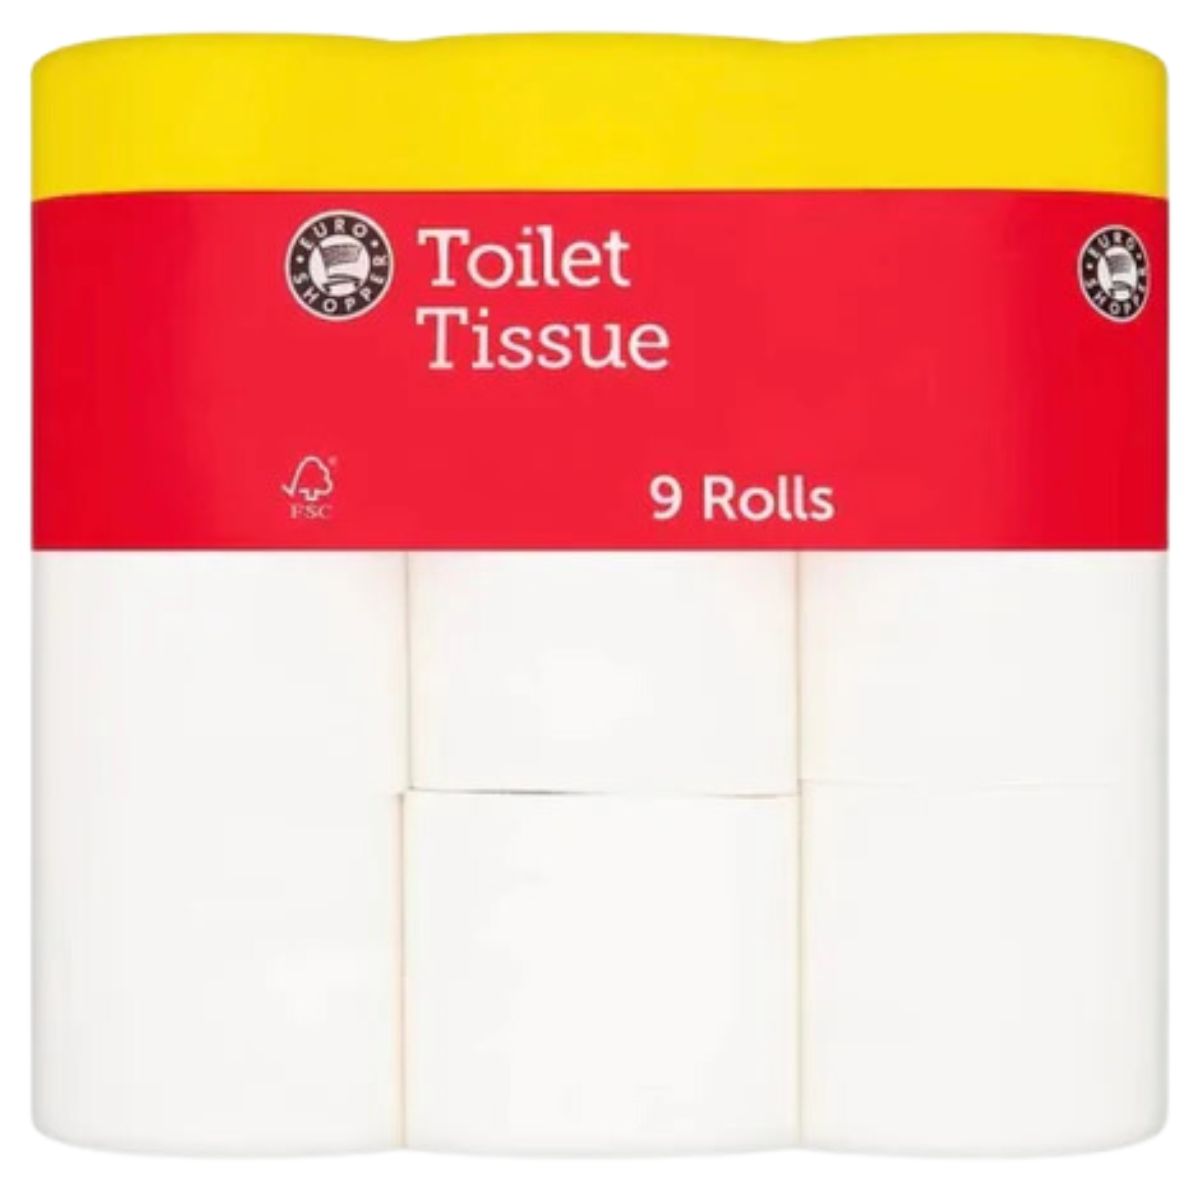 Four rolls of Euro Shopper - Toilet Tissue - 9 Pack in a package.